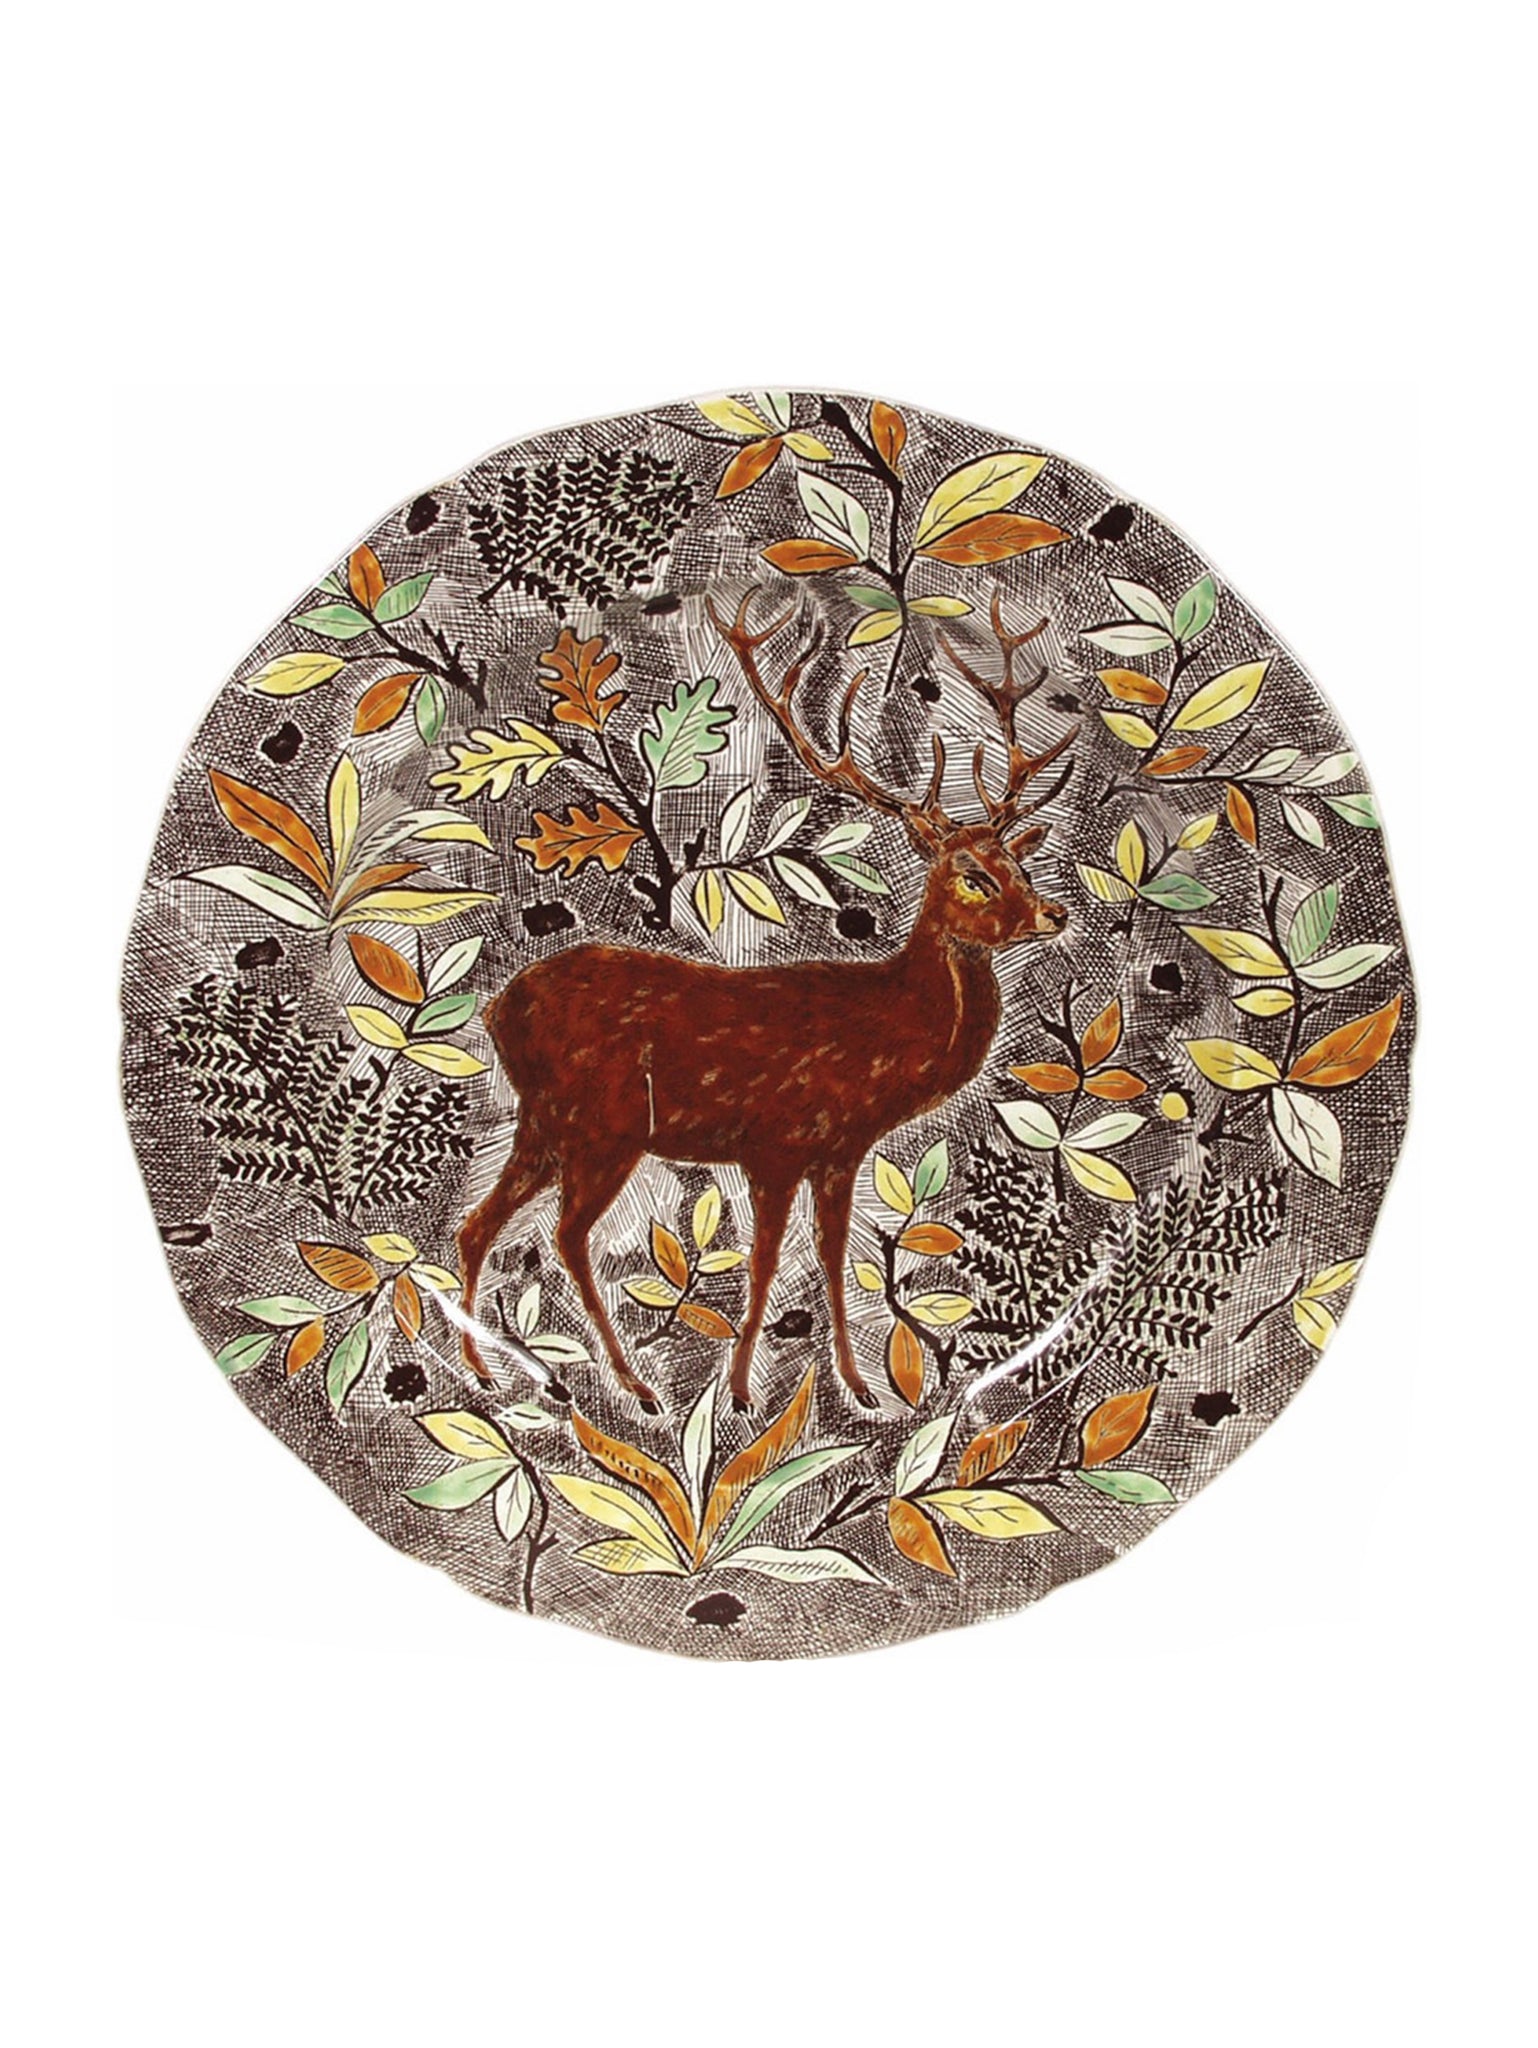 Gien Rambouillet Stag Round Flat Dish Weston Table